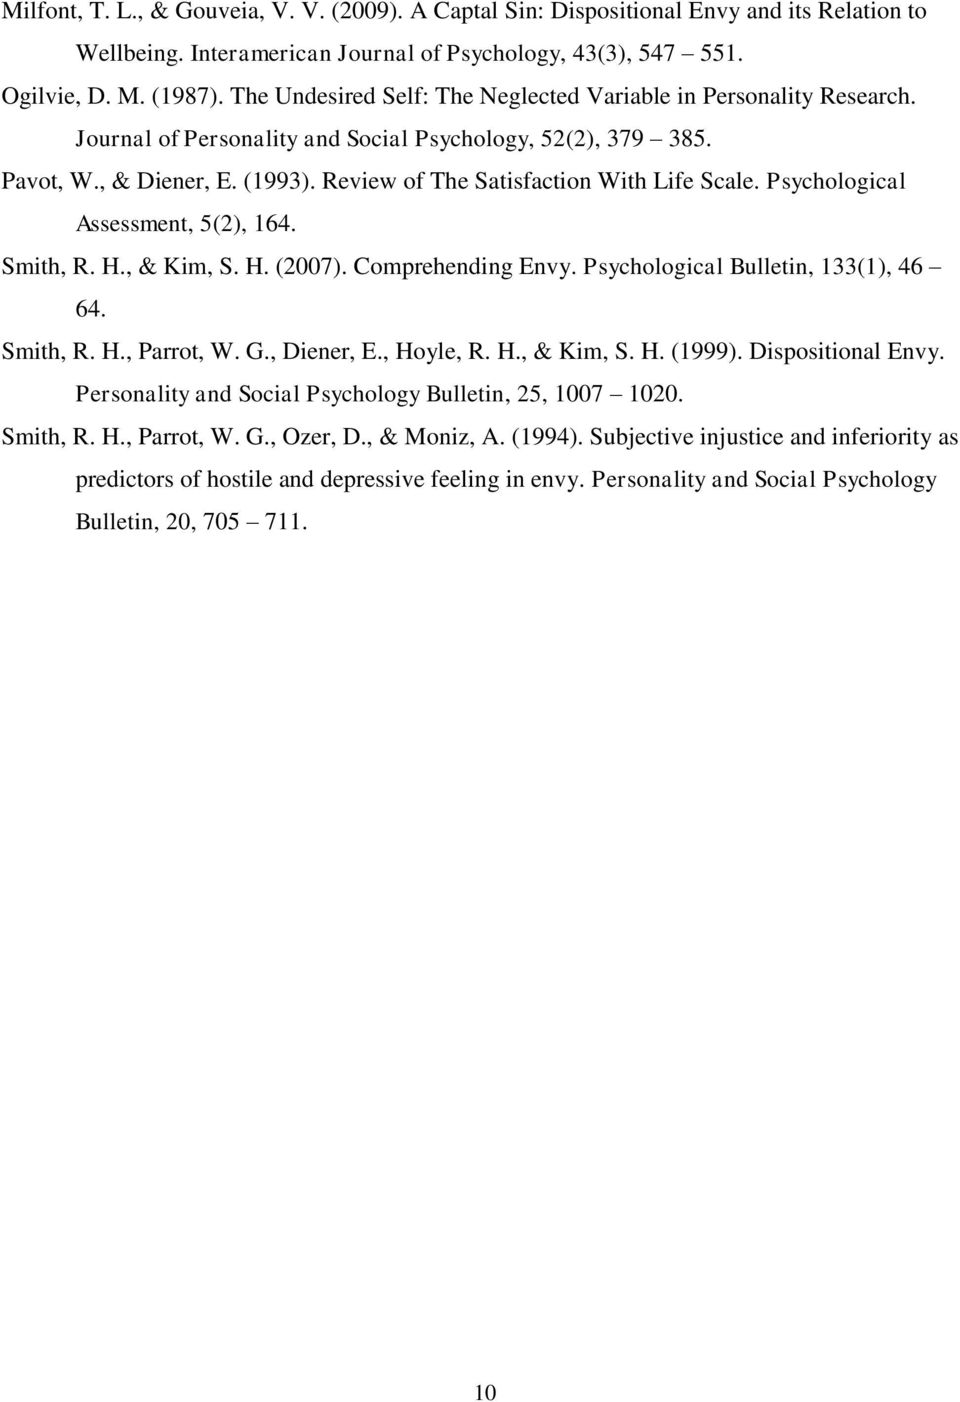 Review of The Satisfaction With Life Scale. Psychological Assessment, 5(2), 164. Smith, R. H., & Kim, S. H. (2007). Comprehending Envy. Psychological Bulletin, 133(1), 46 64. Smith, R. H., Parrot, W.